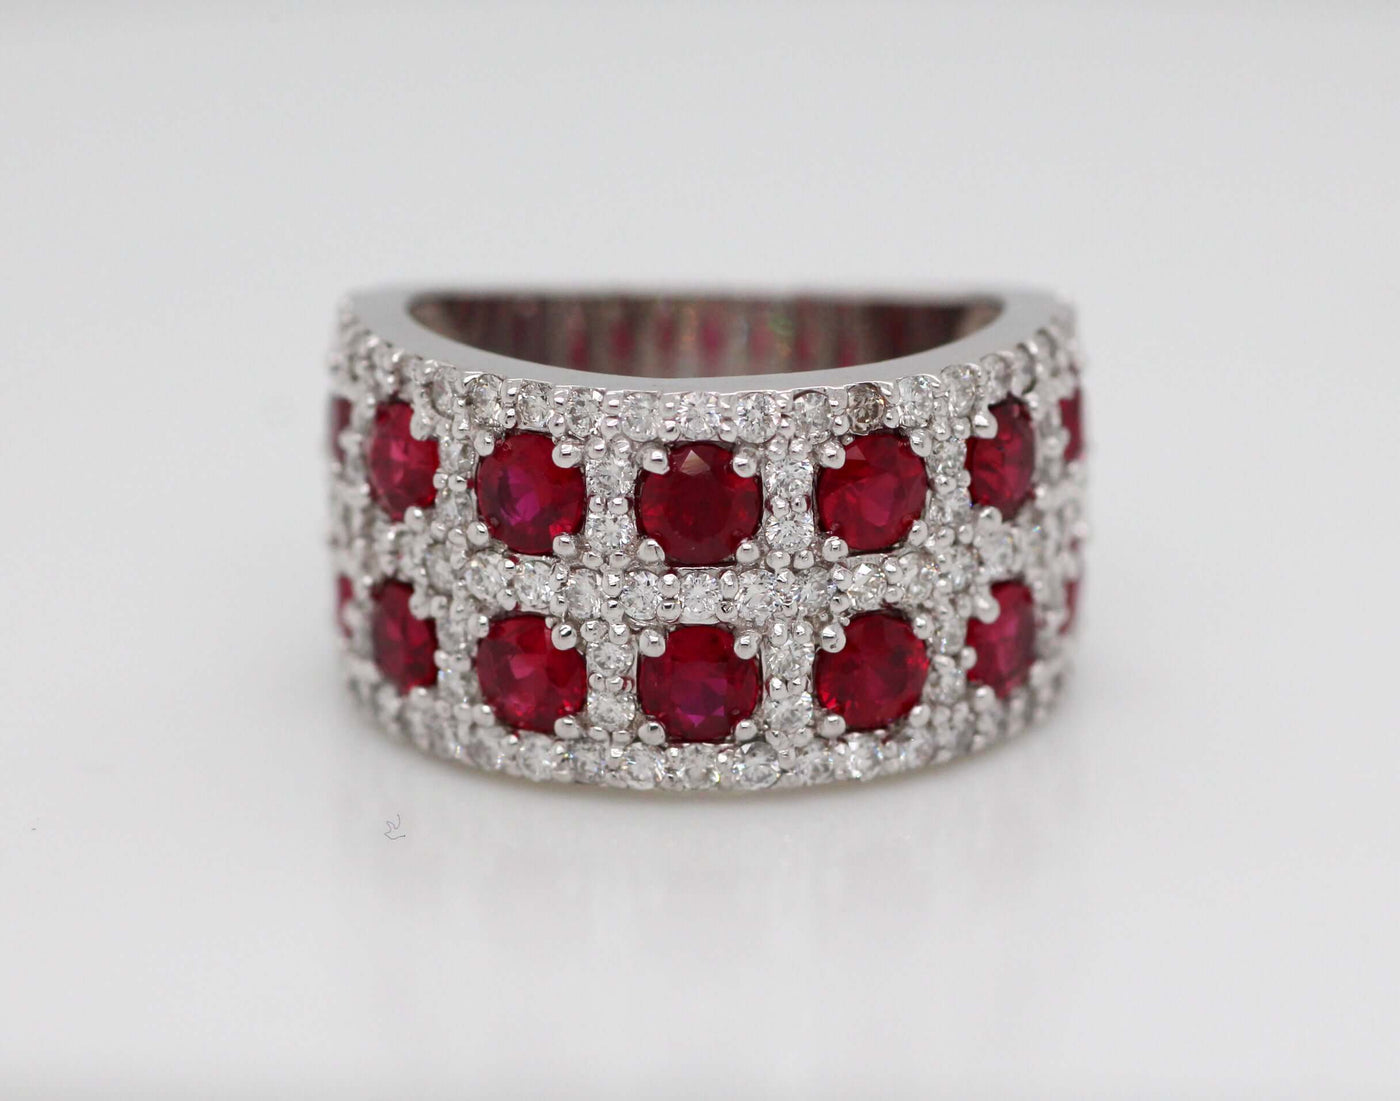 14KW 2.52 CTTW RUBY AND DIAMOND FASHION RING 1.06 CTTW H-SI1